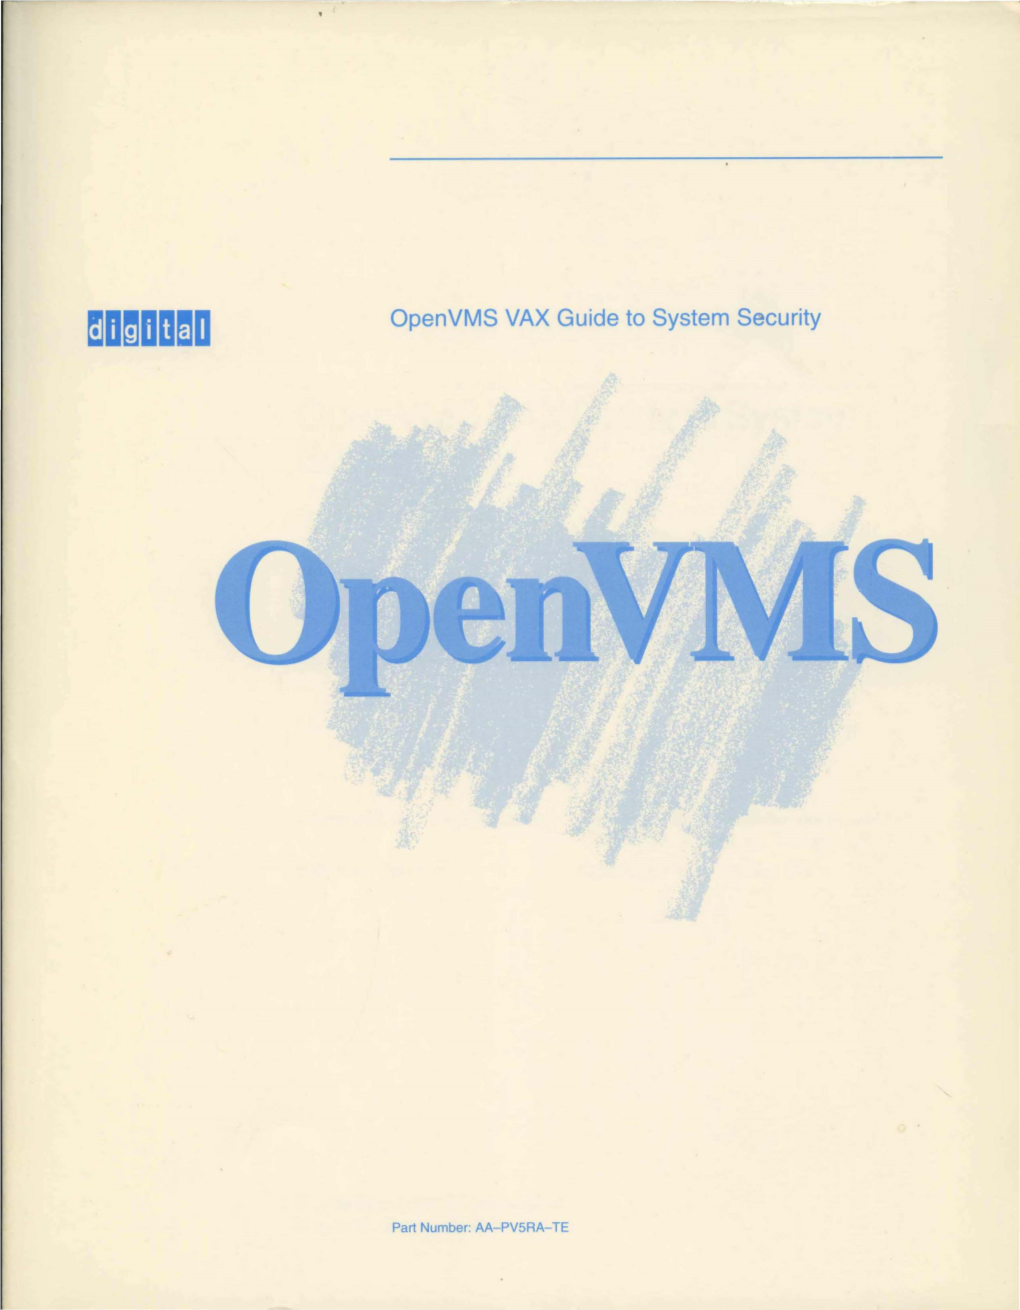 Openvms VAX Guide to System Security